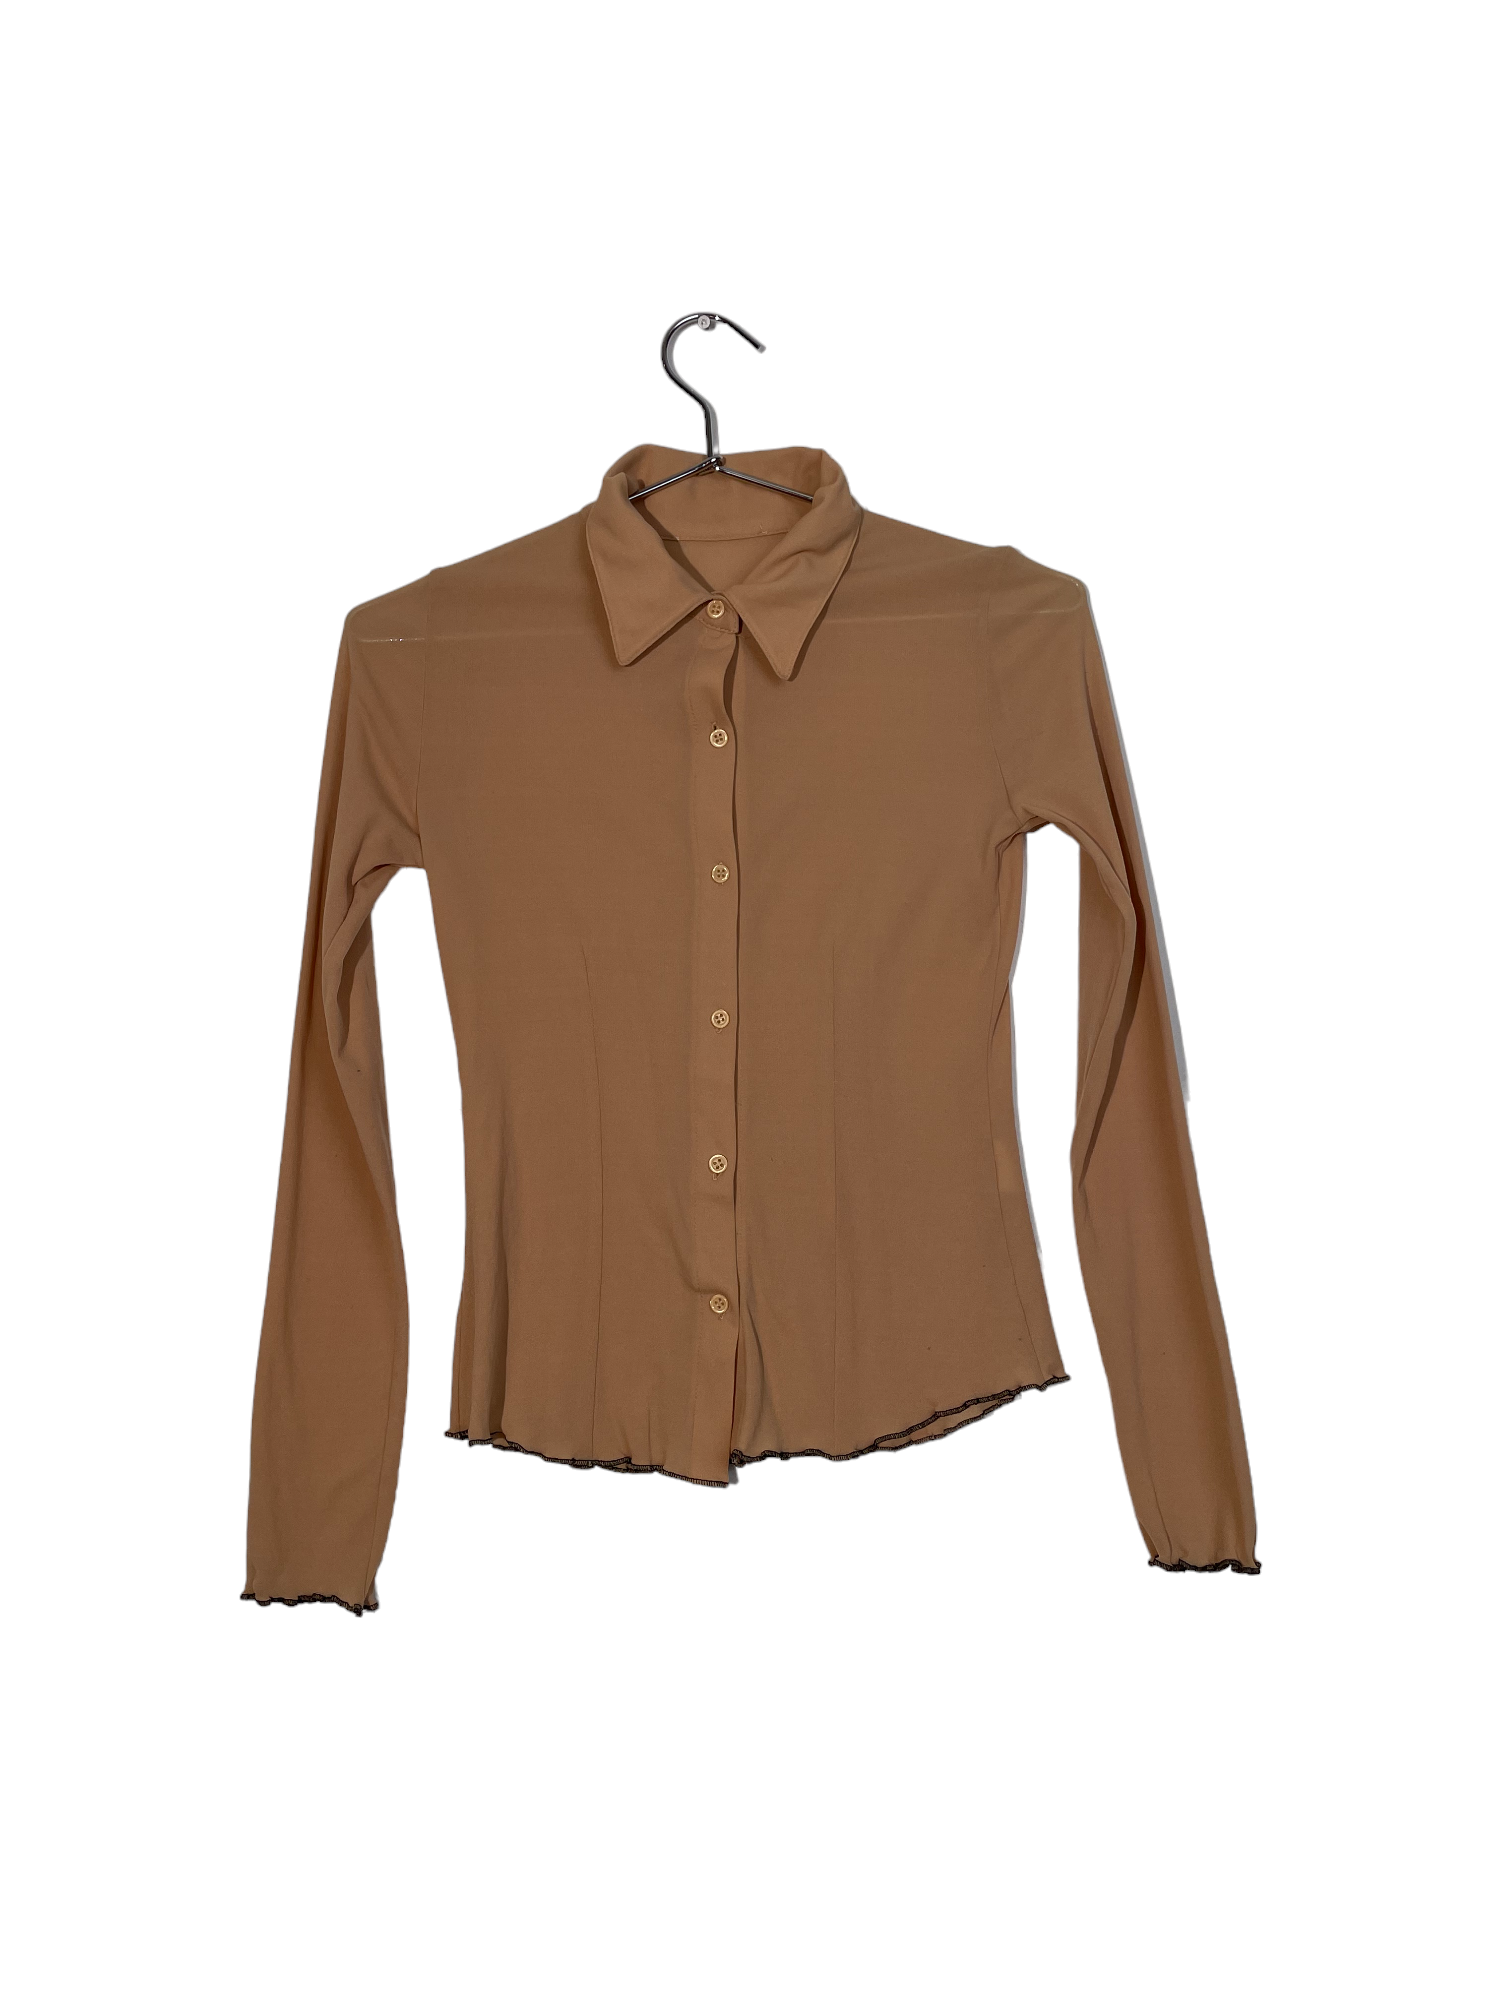 Solid Beige Long Sleeve Button Front Shirt